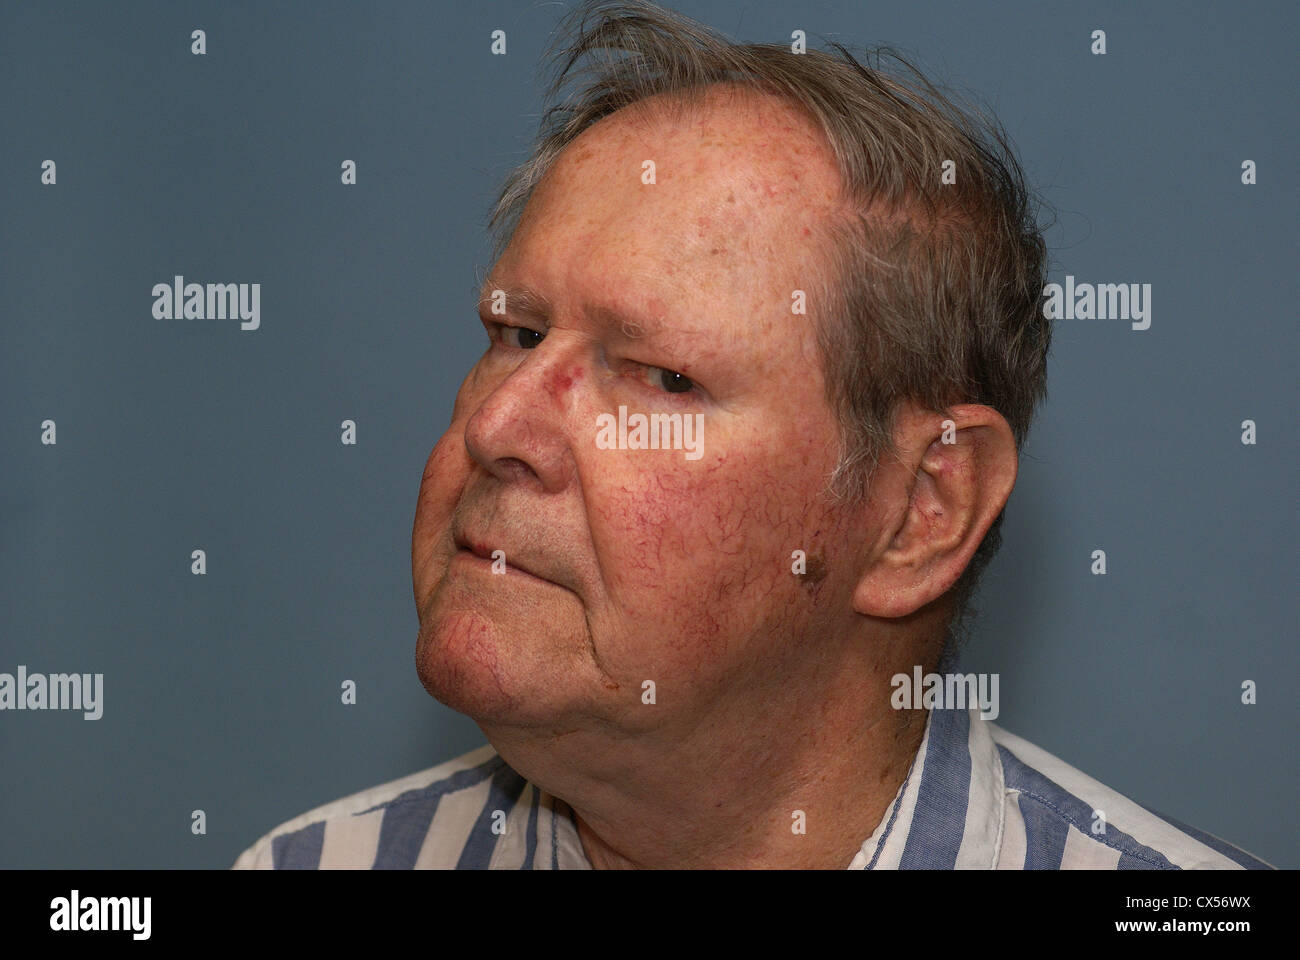 Face of aging man Stock Photo